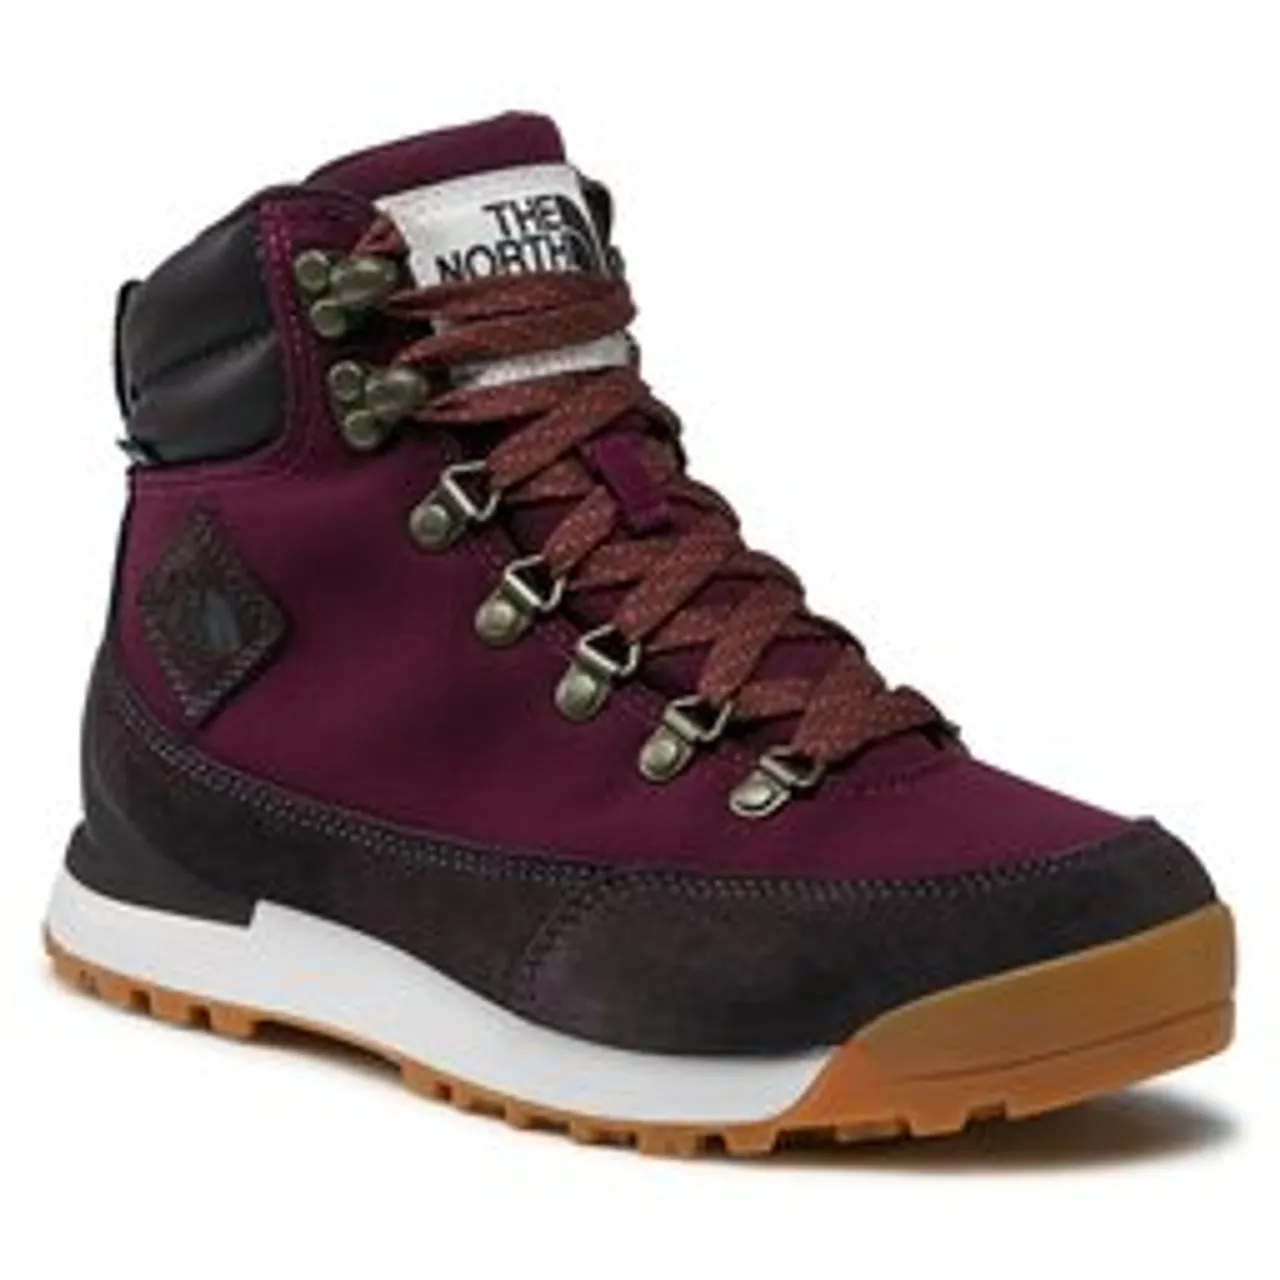 Trekkingschuhe The North Face W Back-To-Berkeley Iv Textile WpNF0A8179OI51 Boysenberry/Coal Brown